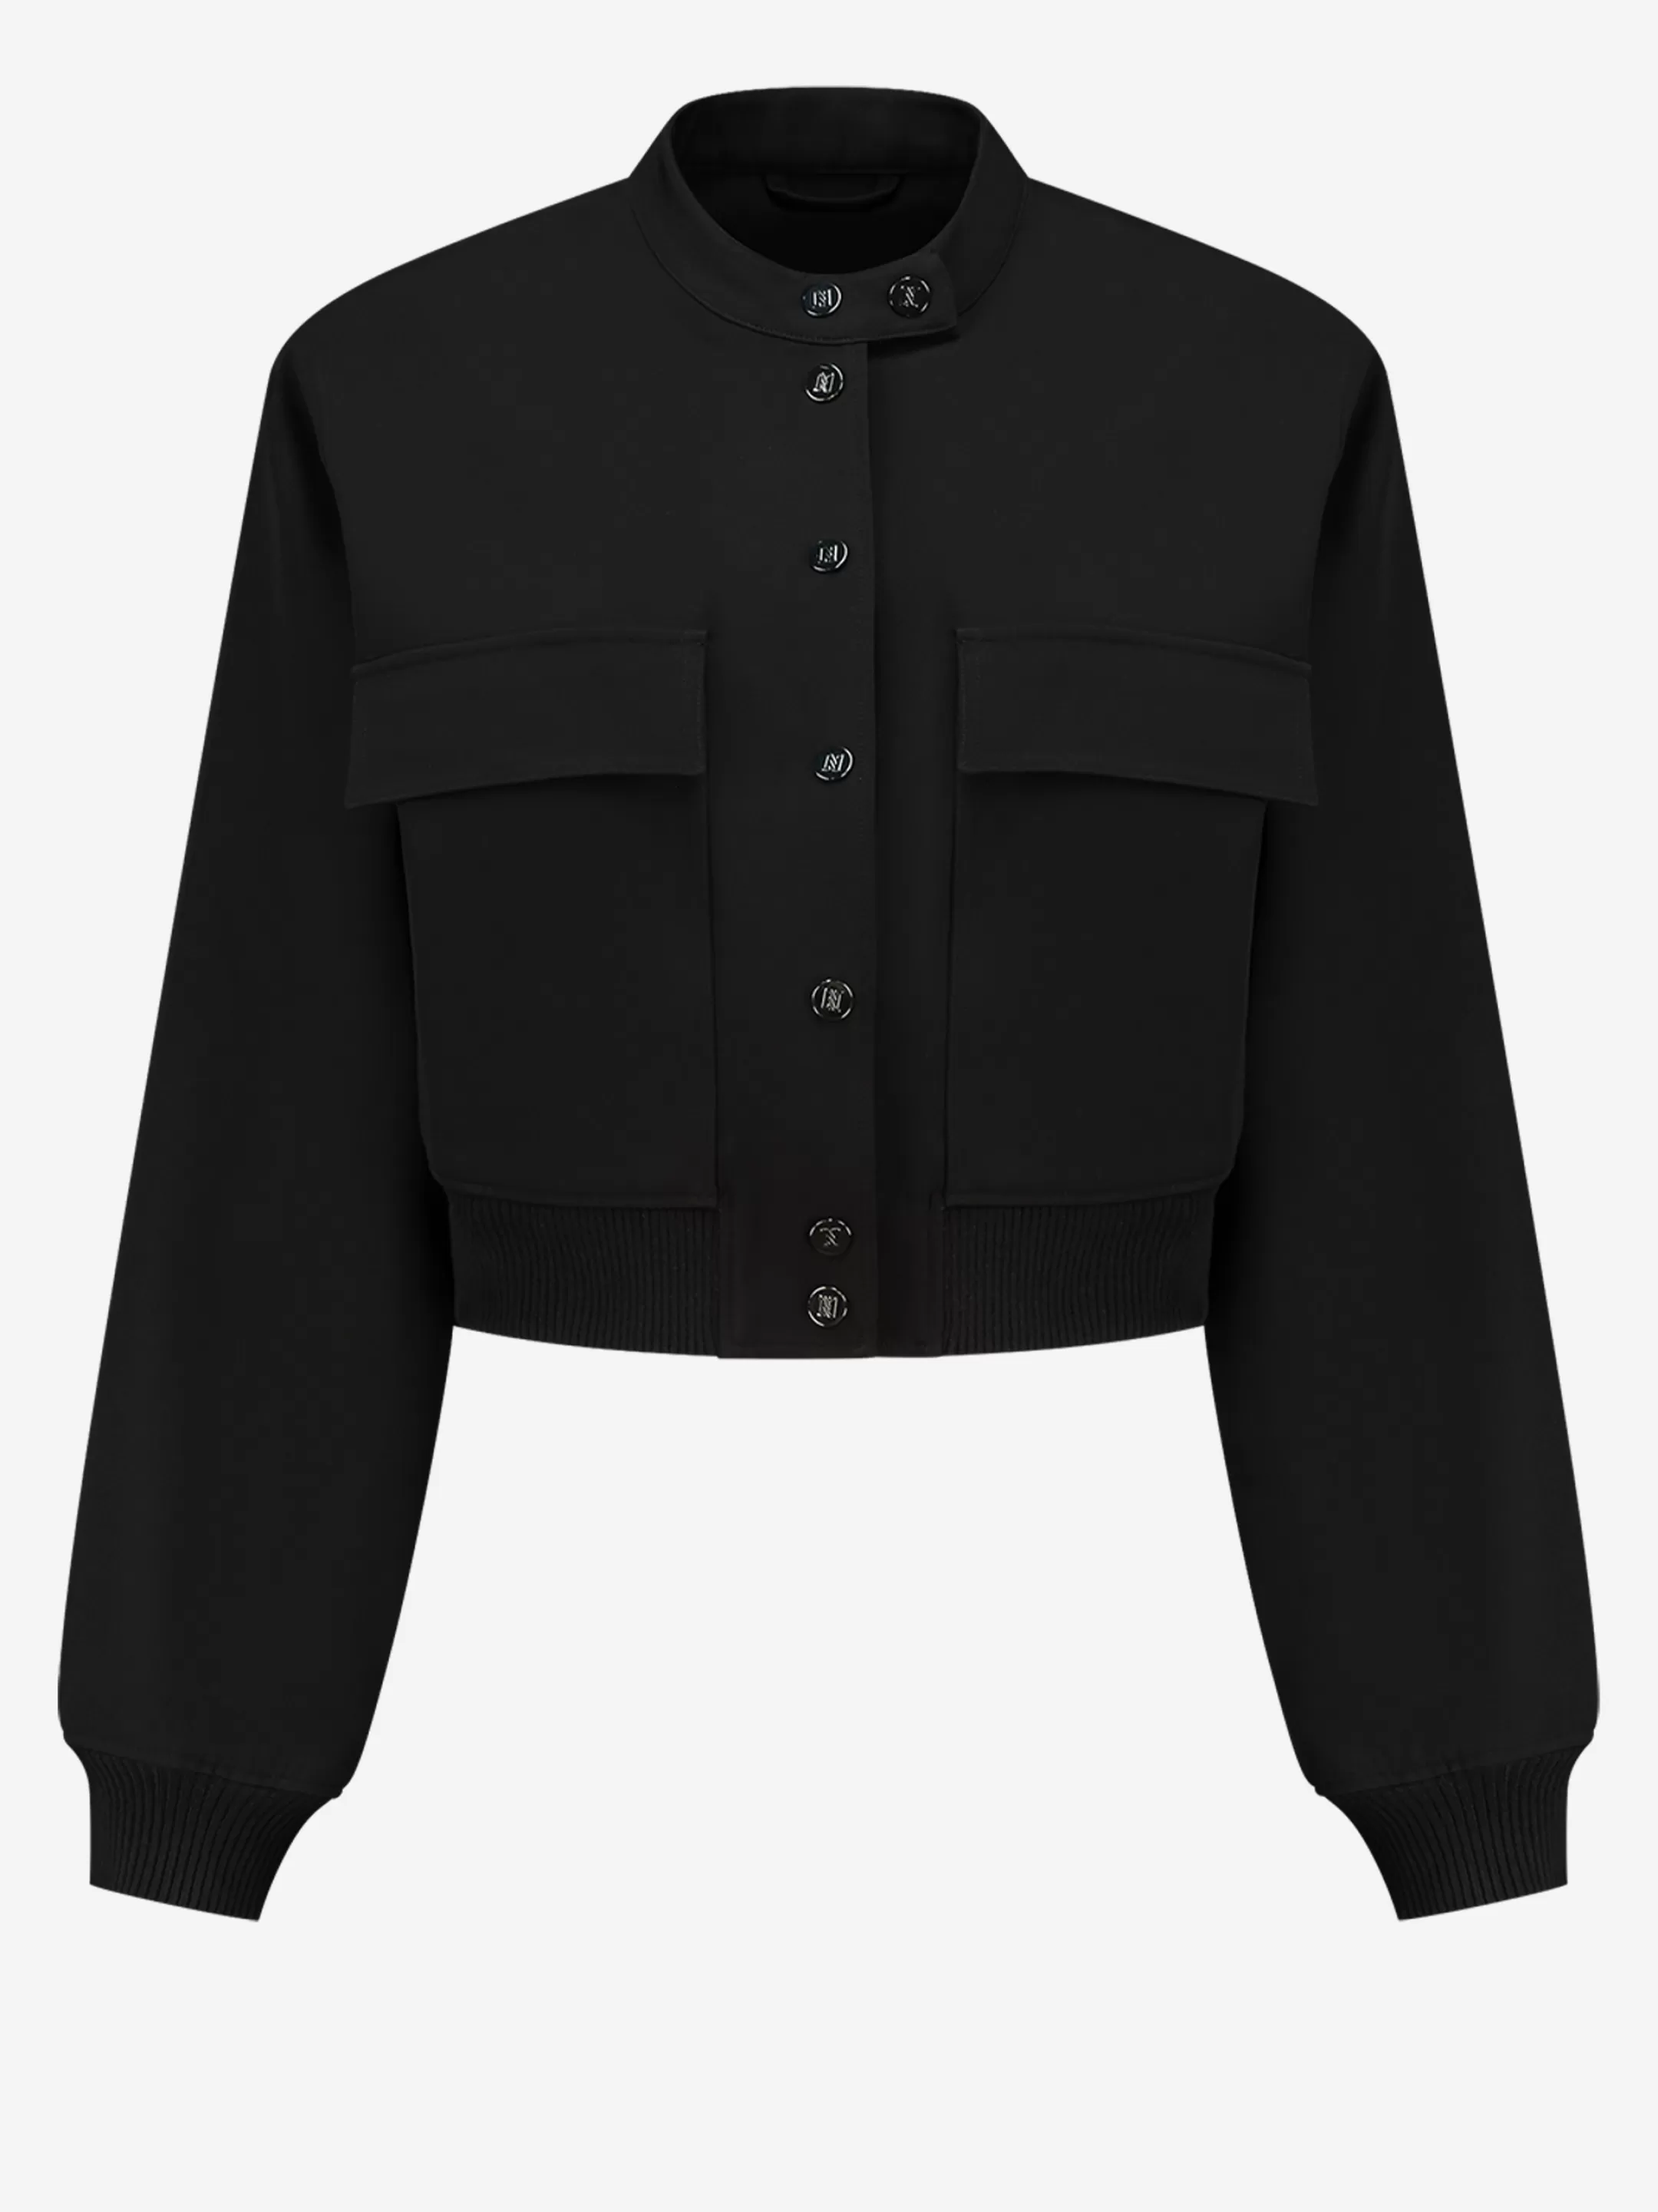 Online BOMBER JACKET Jassen & Blazers | Selected by Kate Moss